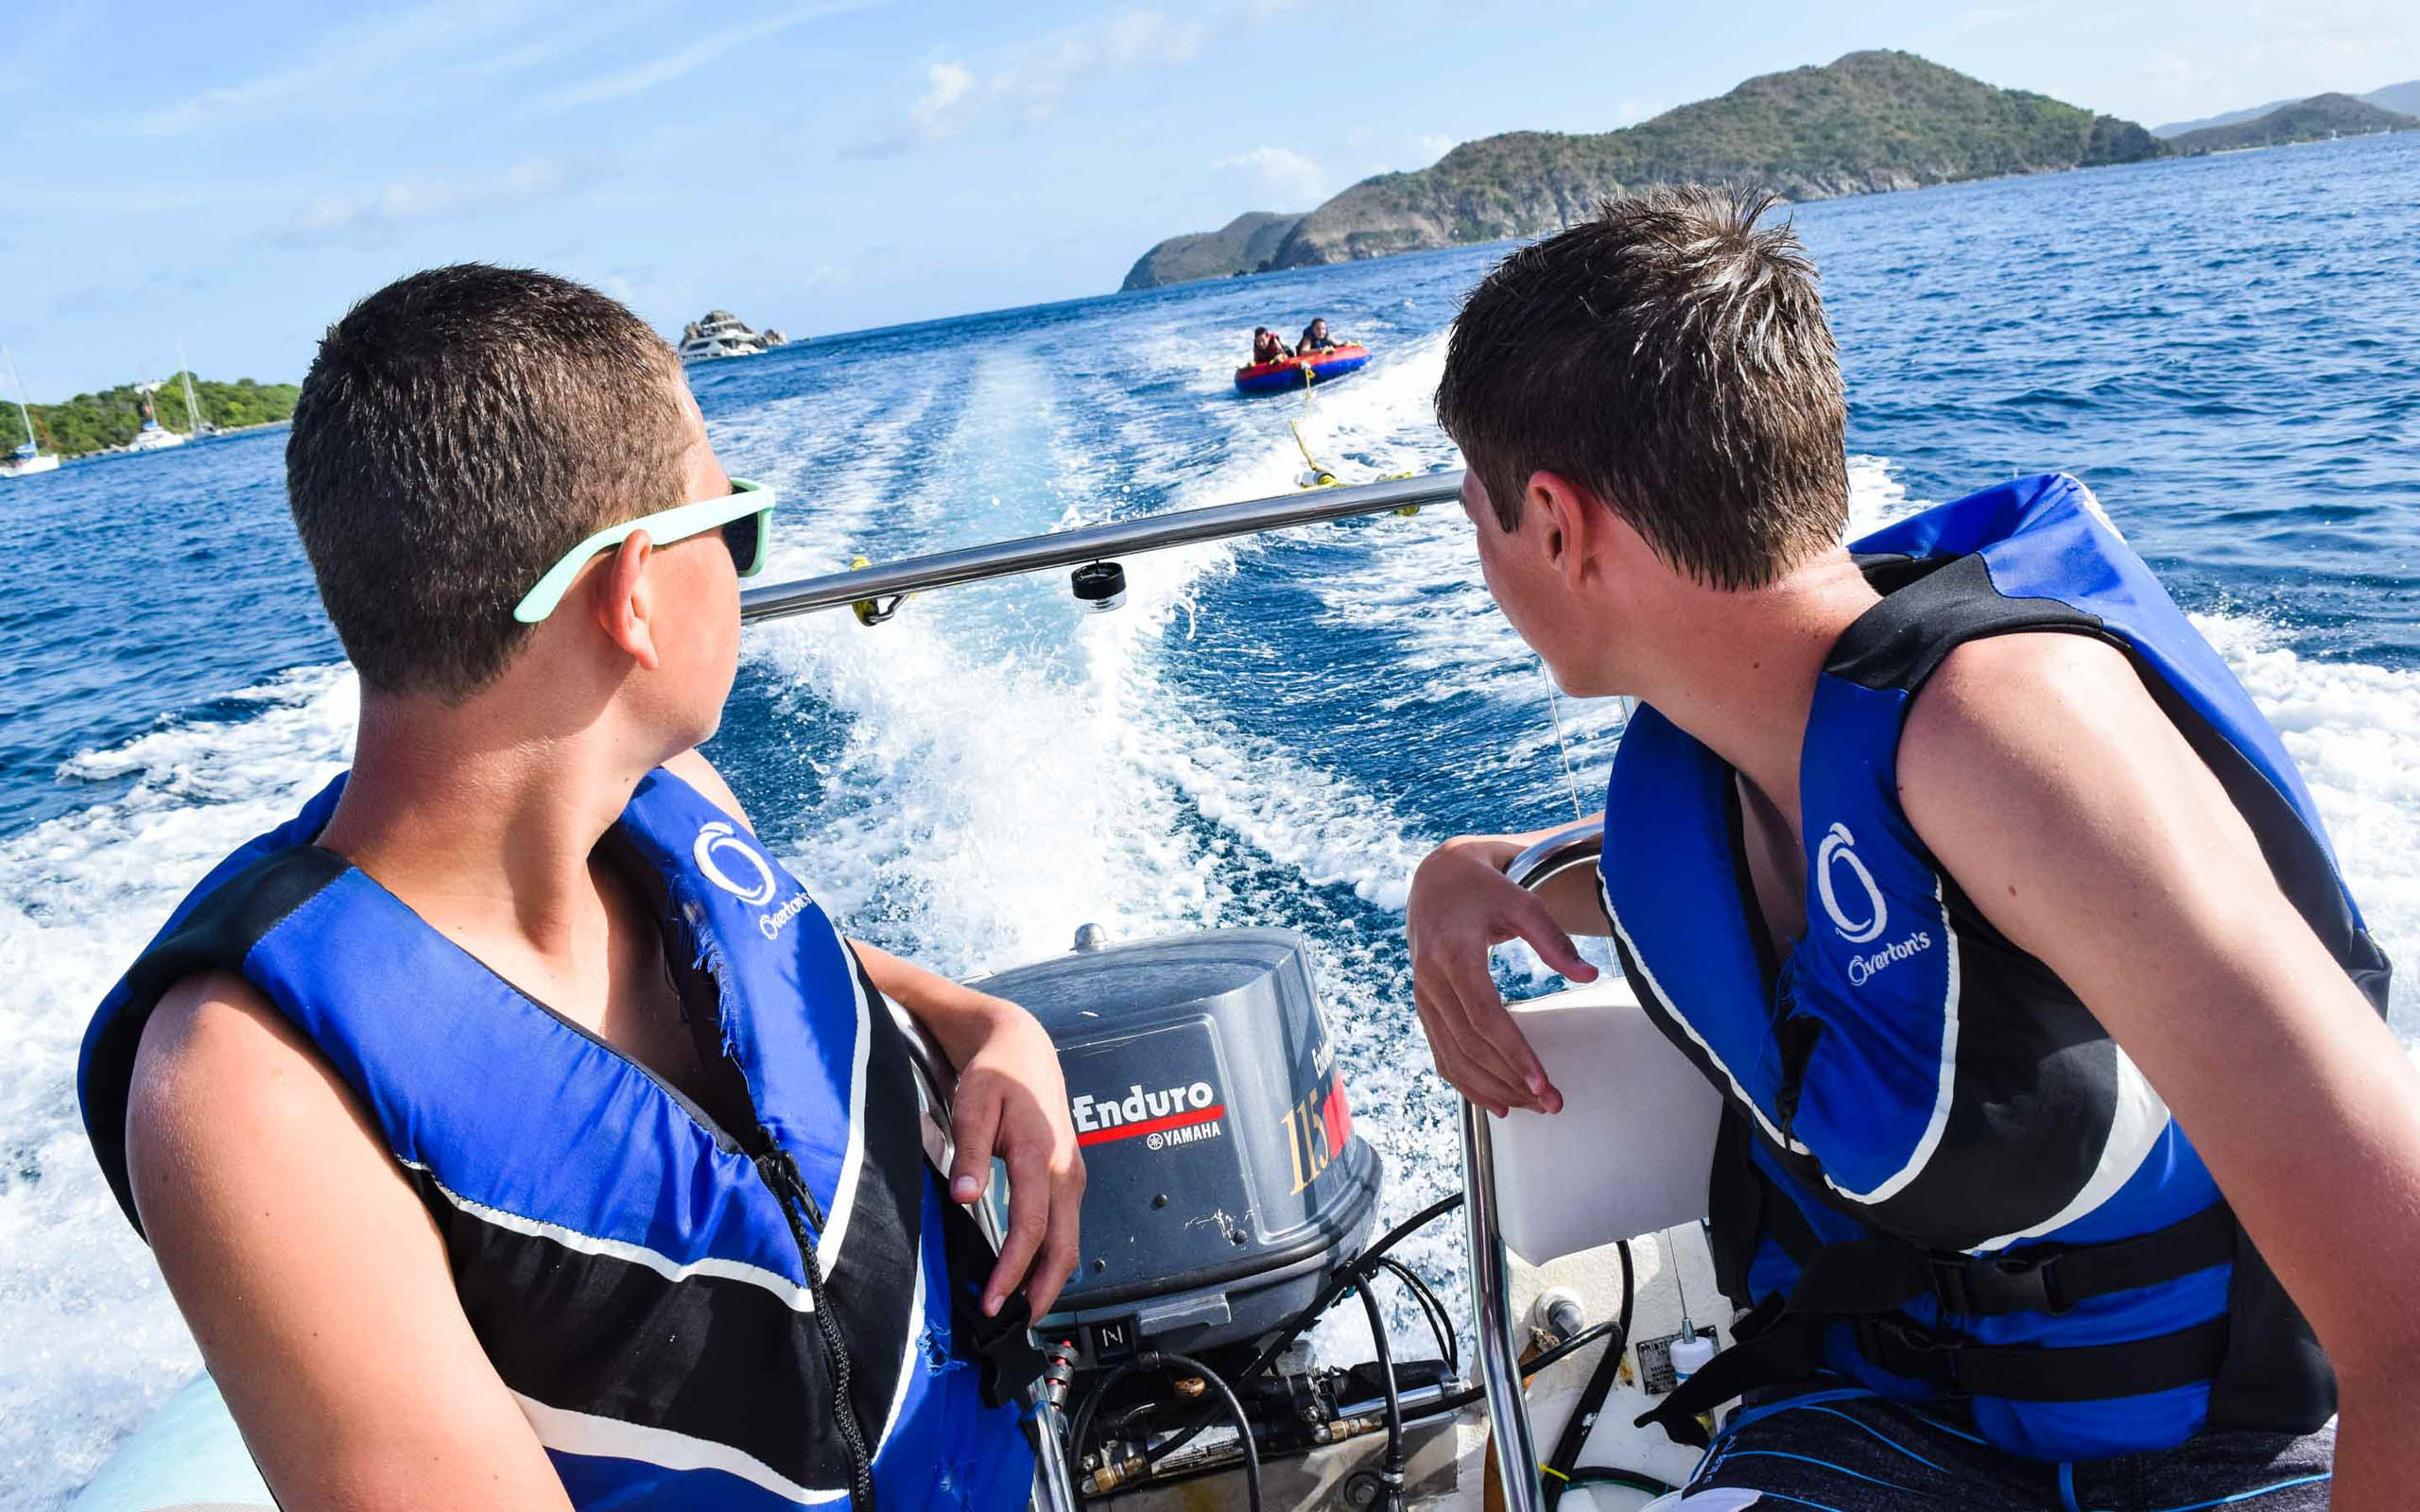 Two young men on a speed boat in the ocean.